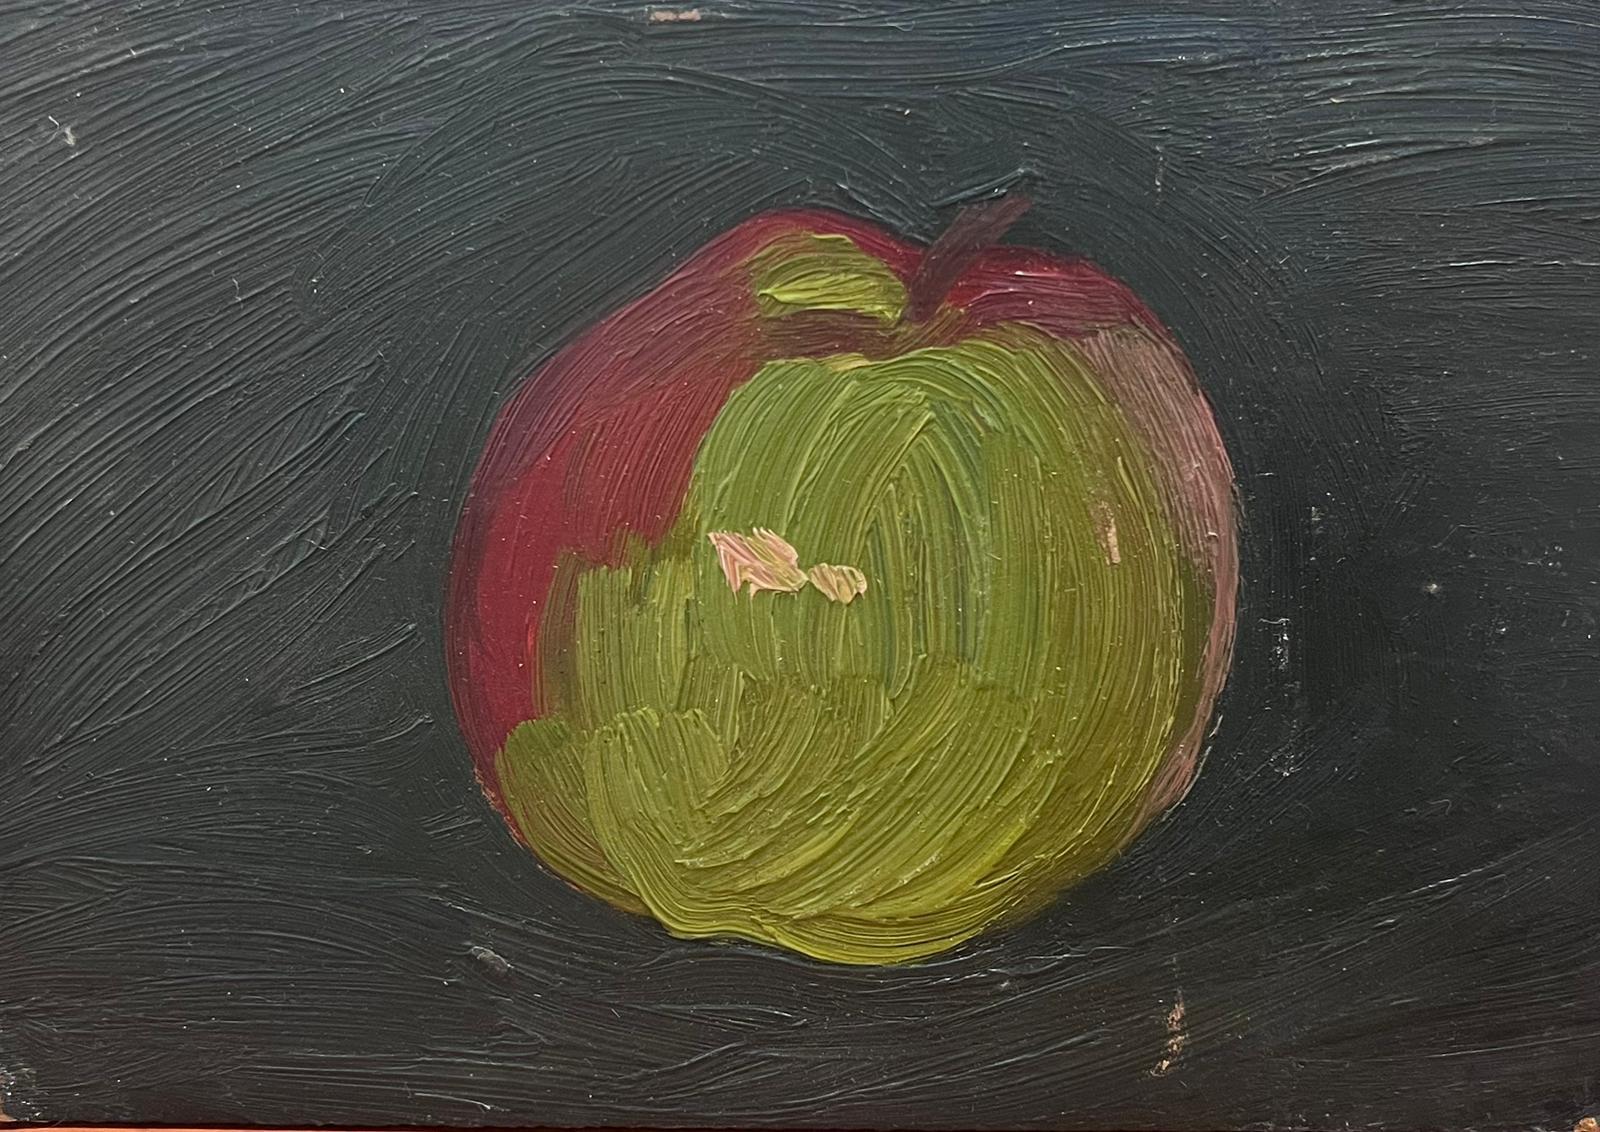 French School Interior Painting - 20th Century French Modernist Oil Painting Still Life of an Apple